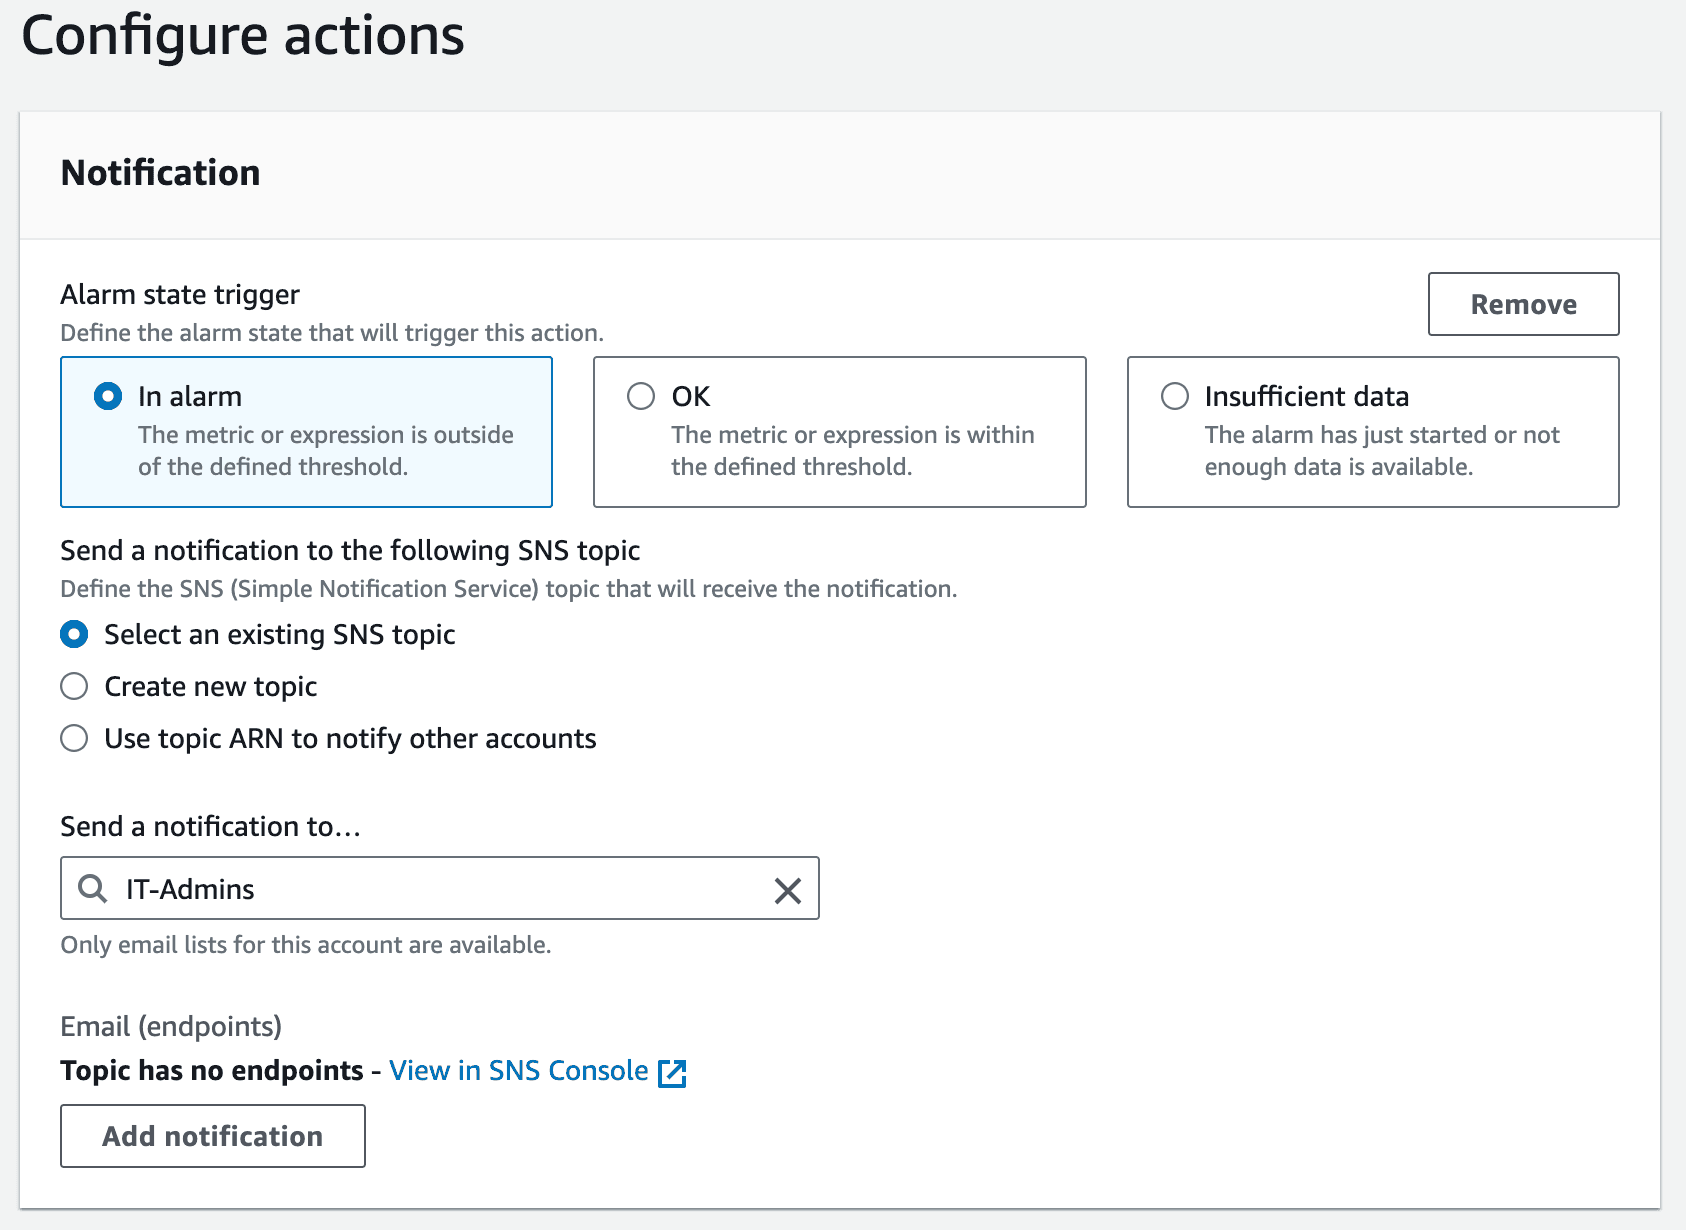 Configure actions to send to Amazon SNS topic